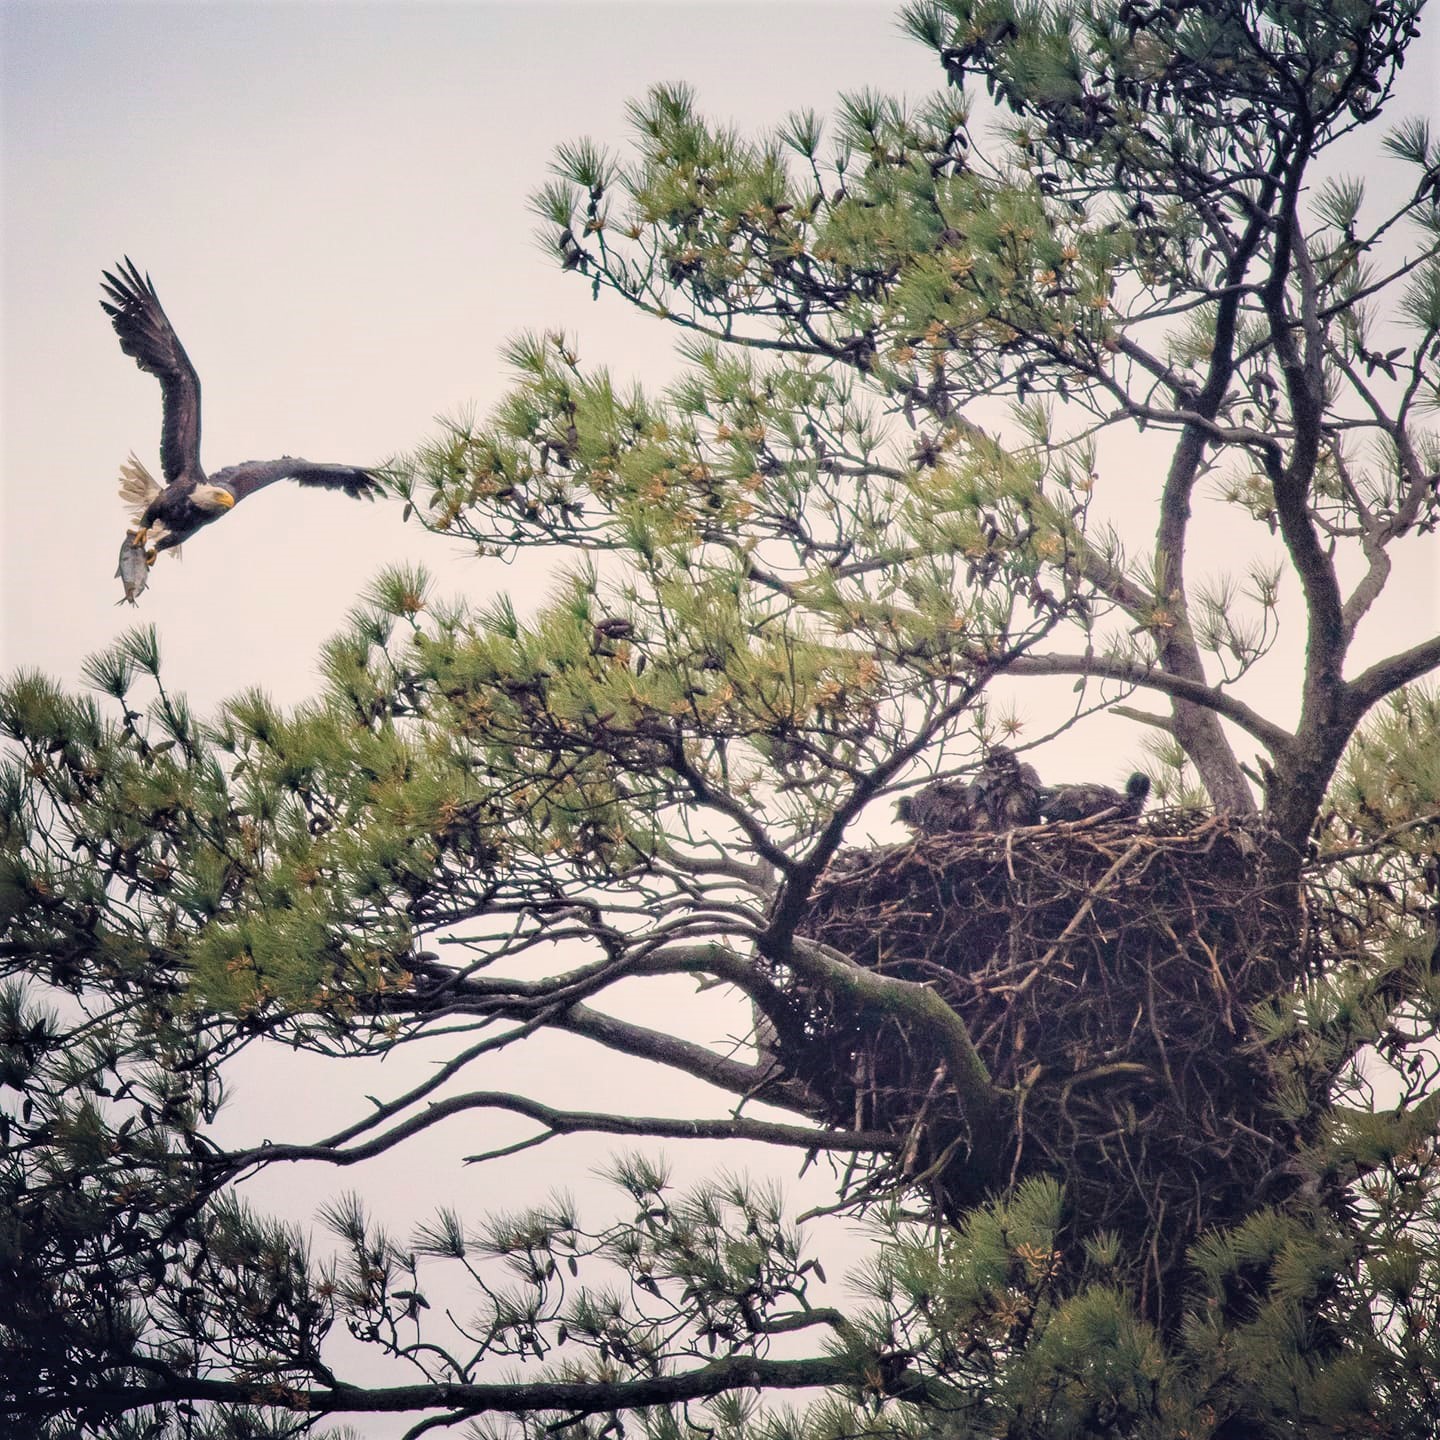 A bald eagle delivers a fish to its chicks at Blackwater National Wildlife Refuge in Maryland.